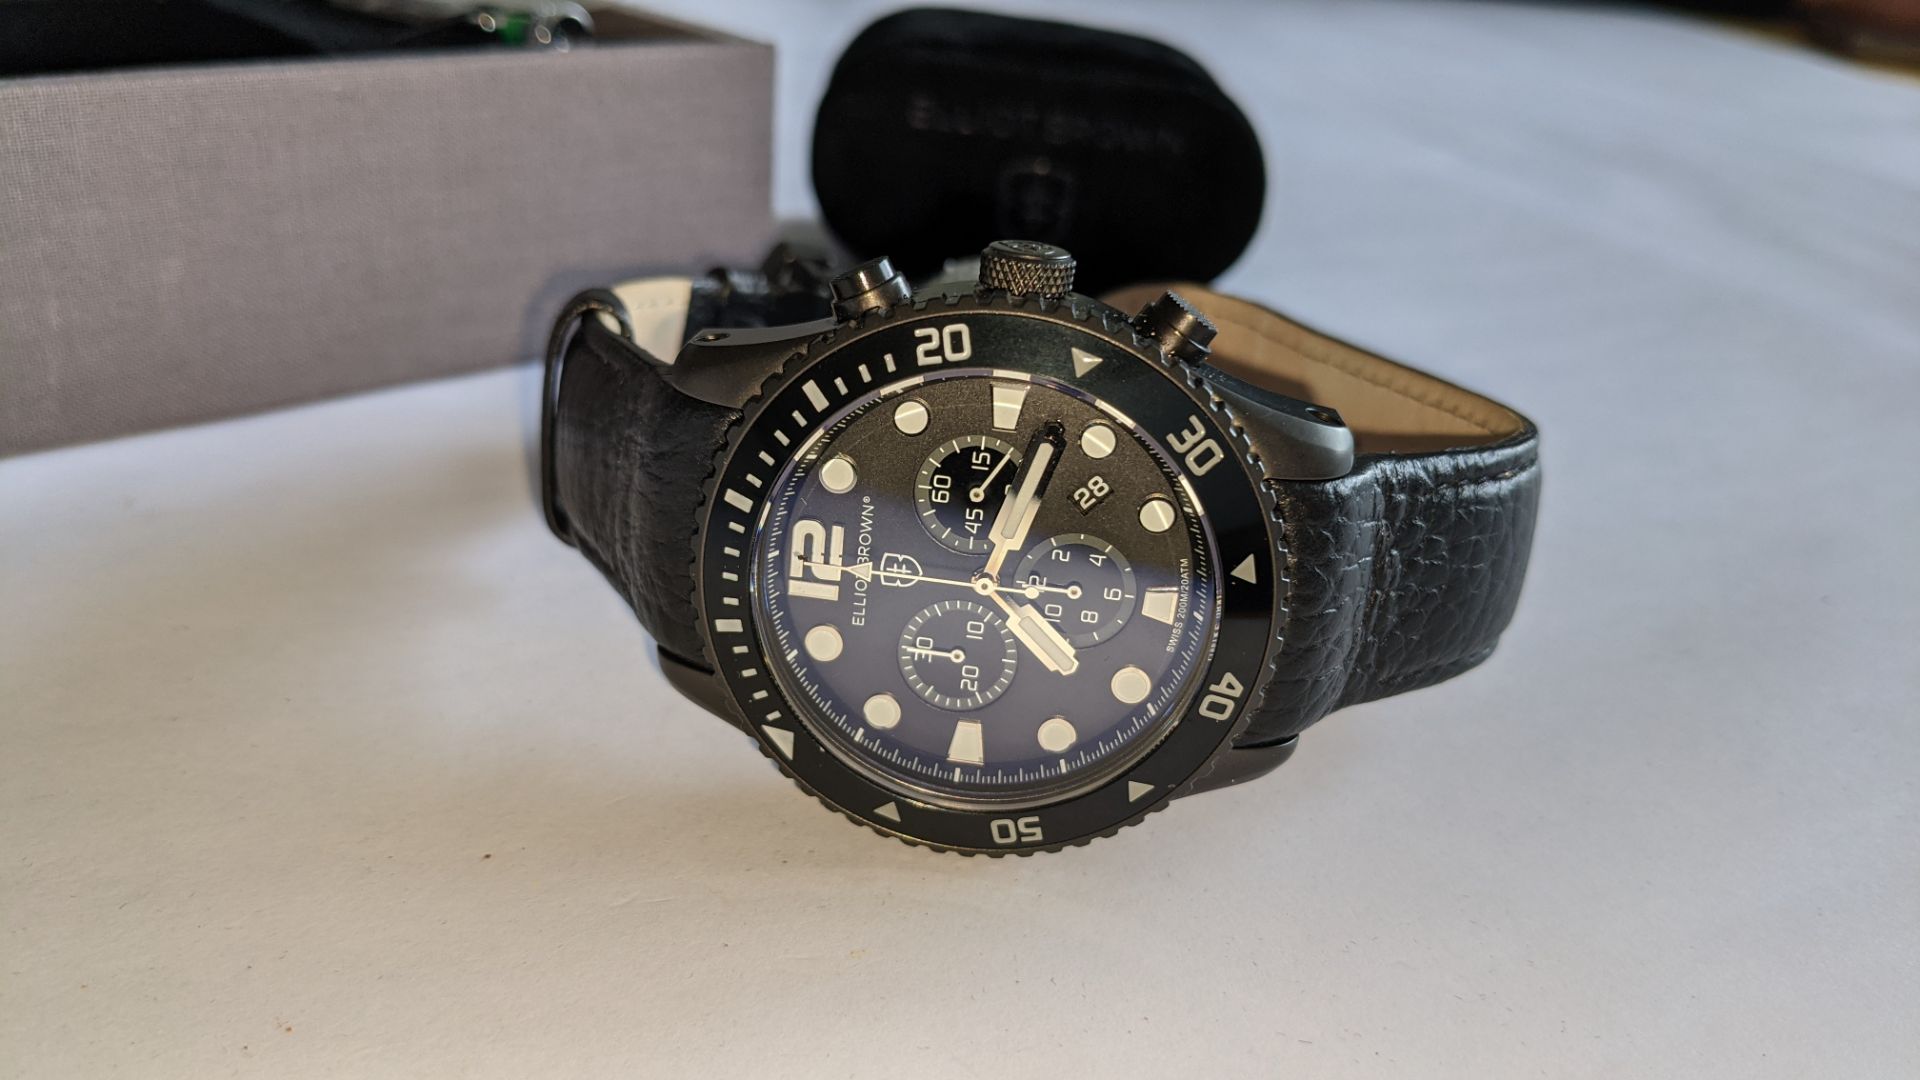 Elliot Brown The Bloxworth watch on leather strap, product code 929-001-L01. Stainless steel, 200M w - Image 9 of 15